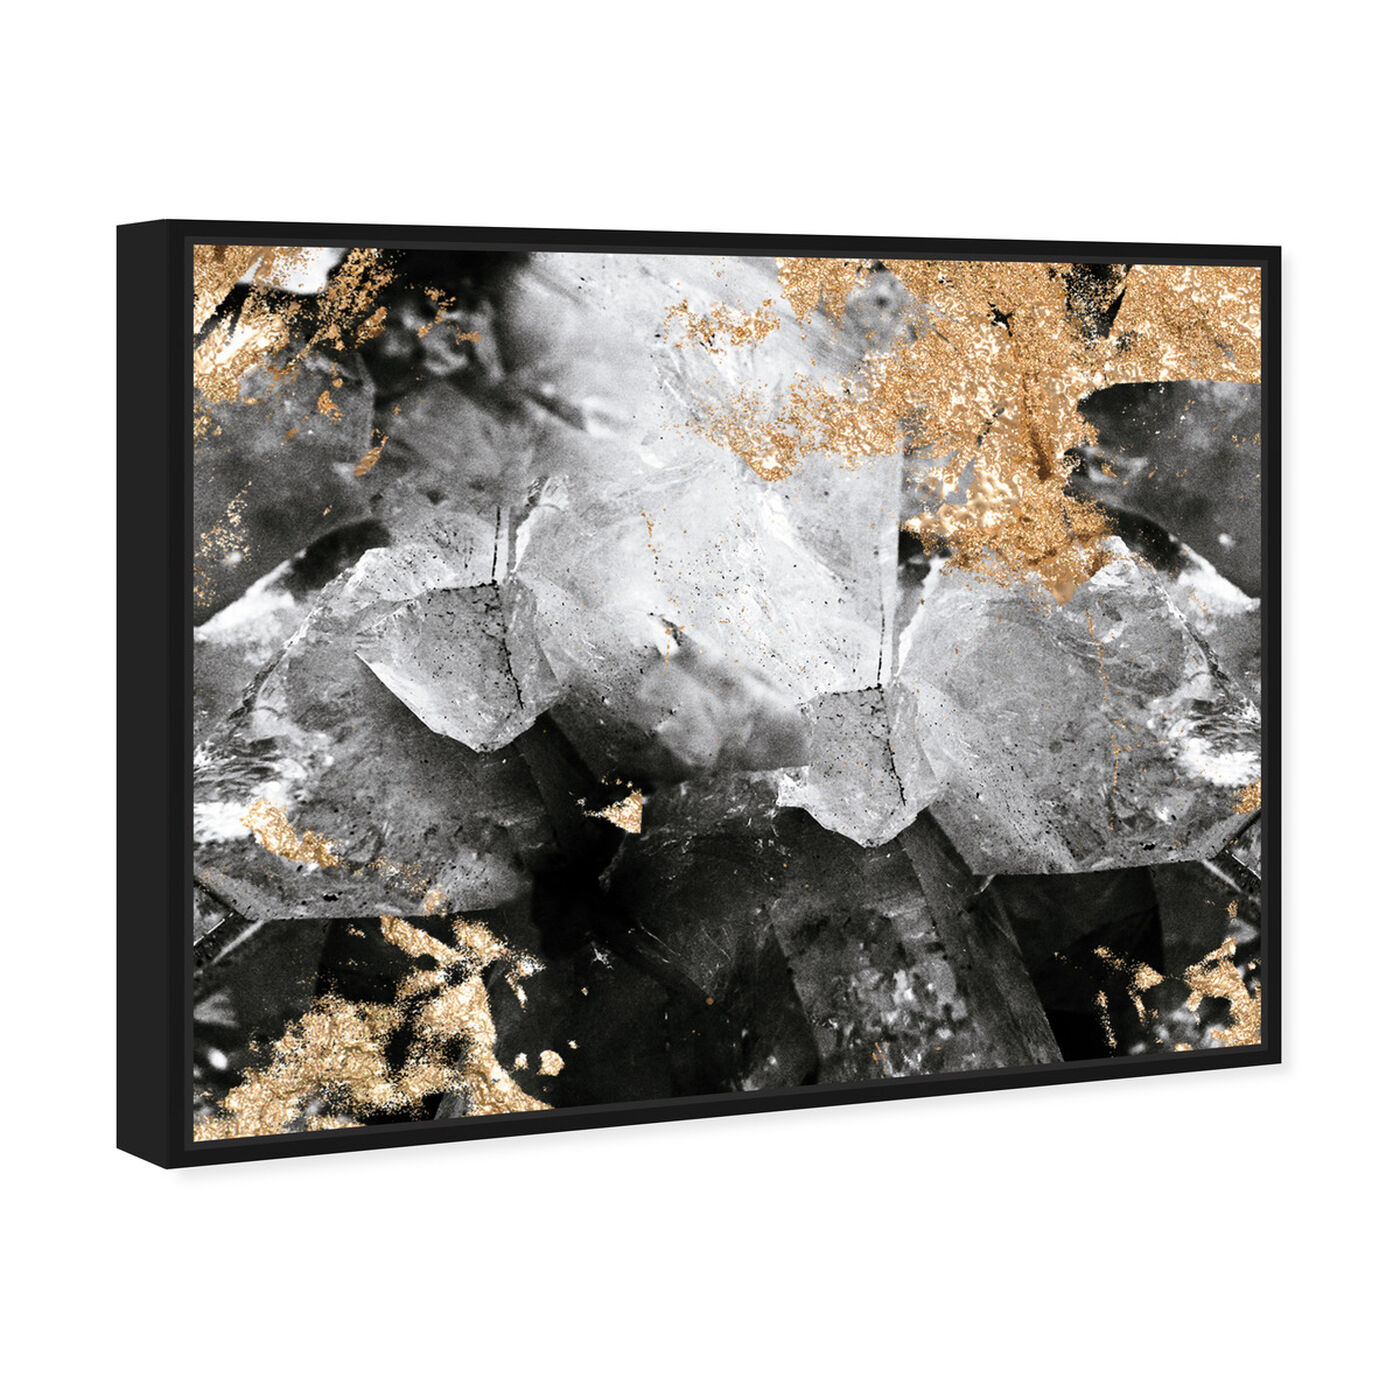 Angled view of Diamond Crystals featuring abstract and crystals art.